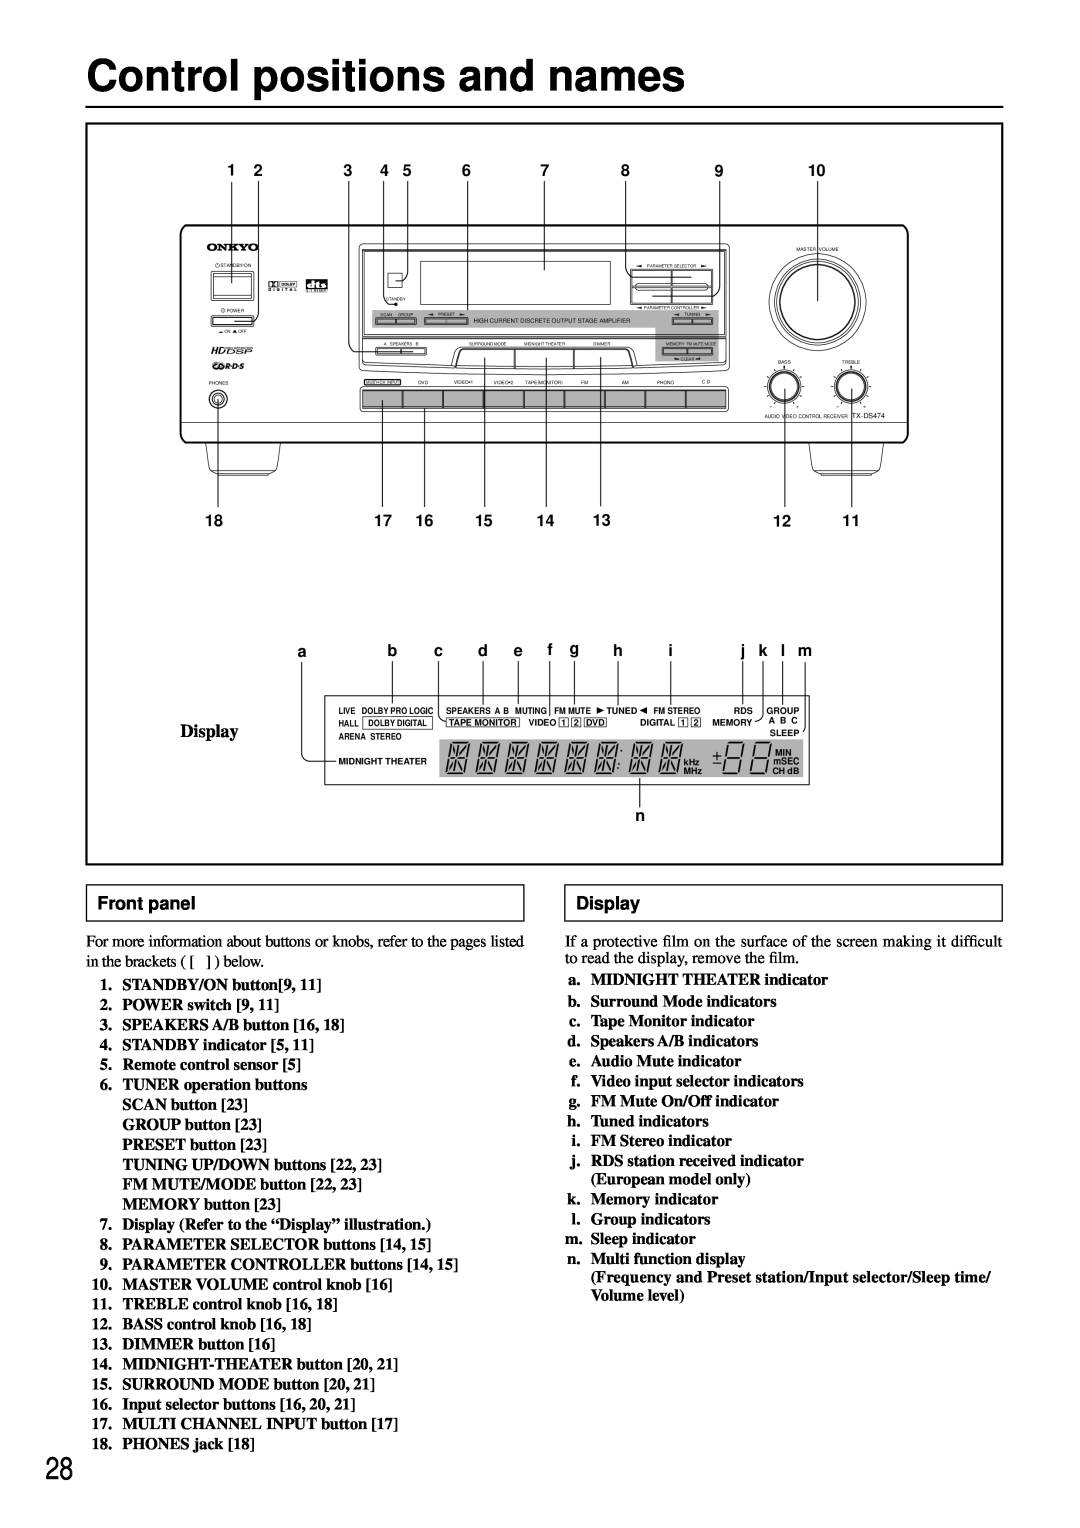 Onkyo TX-DS474 appendix Control positions and names, Display, Front panel, e f g, j k l m 